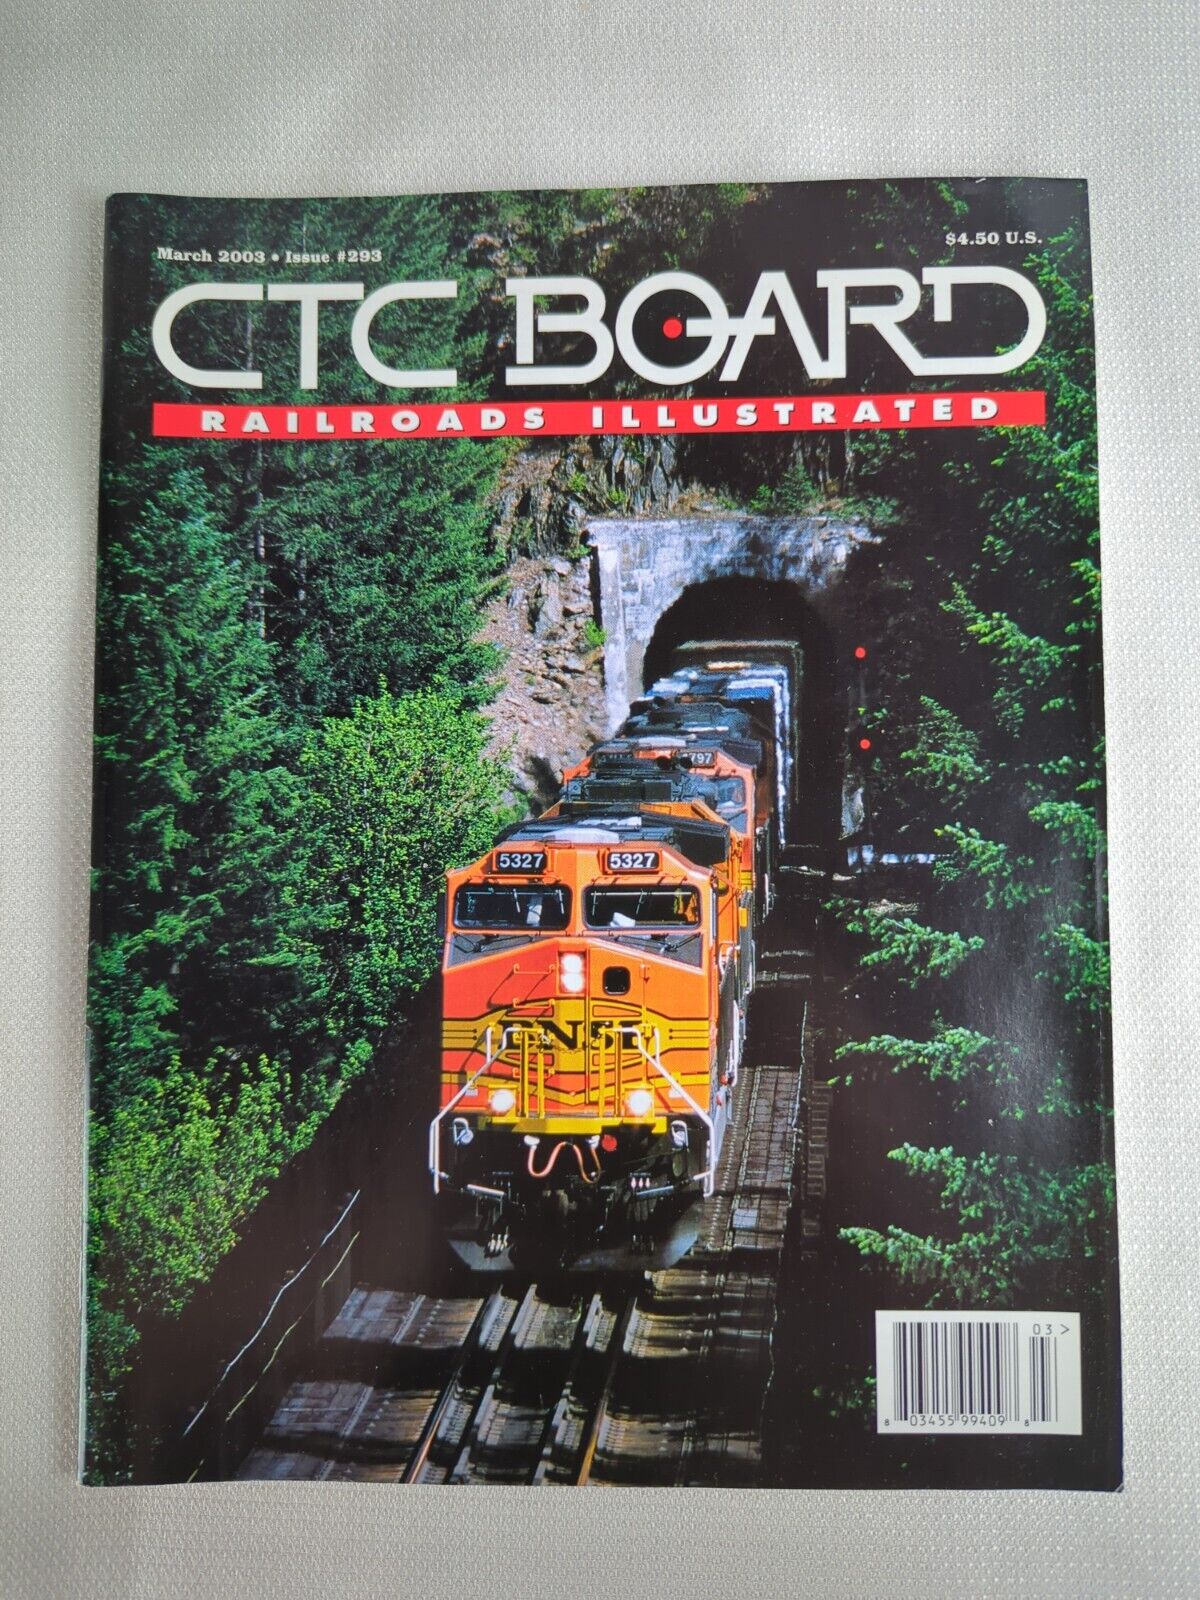 CTC Board Railroads Illustrated Issue Number 293 March 2003